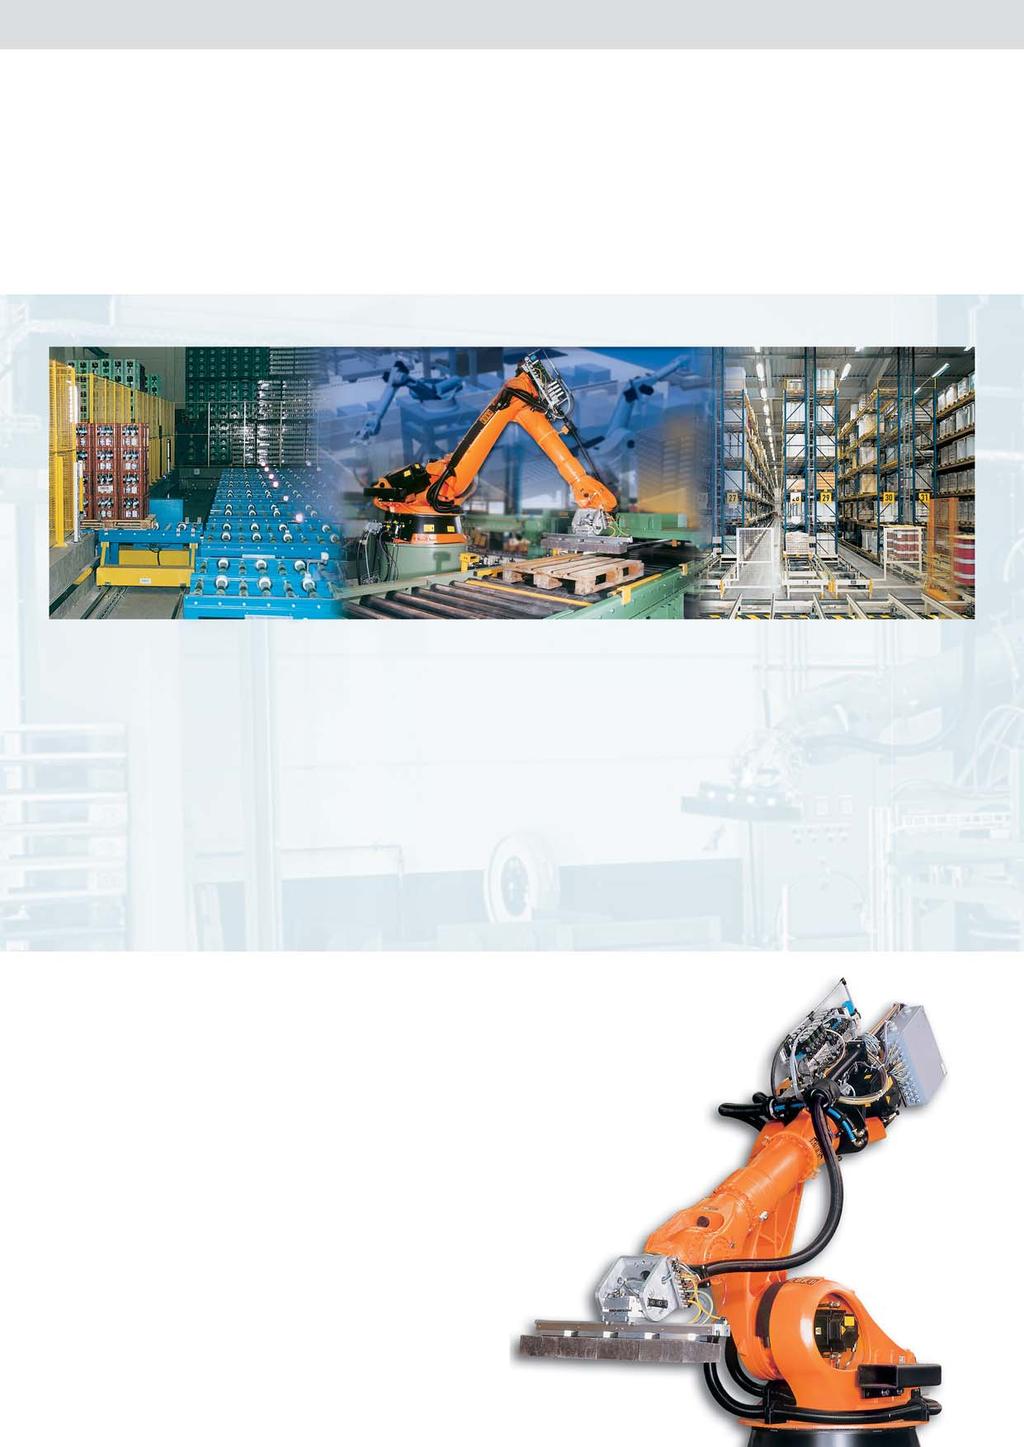 Spezialist in Automated Systems Conception KÖHL offers comprehensive solutions for complex automation systems - from projection and implementation through to the provision of comprehensive service.